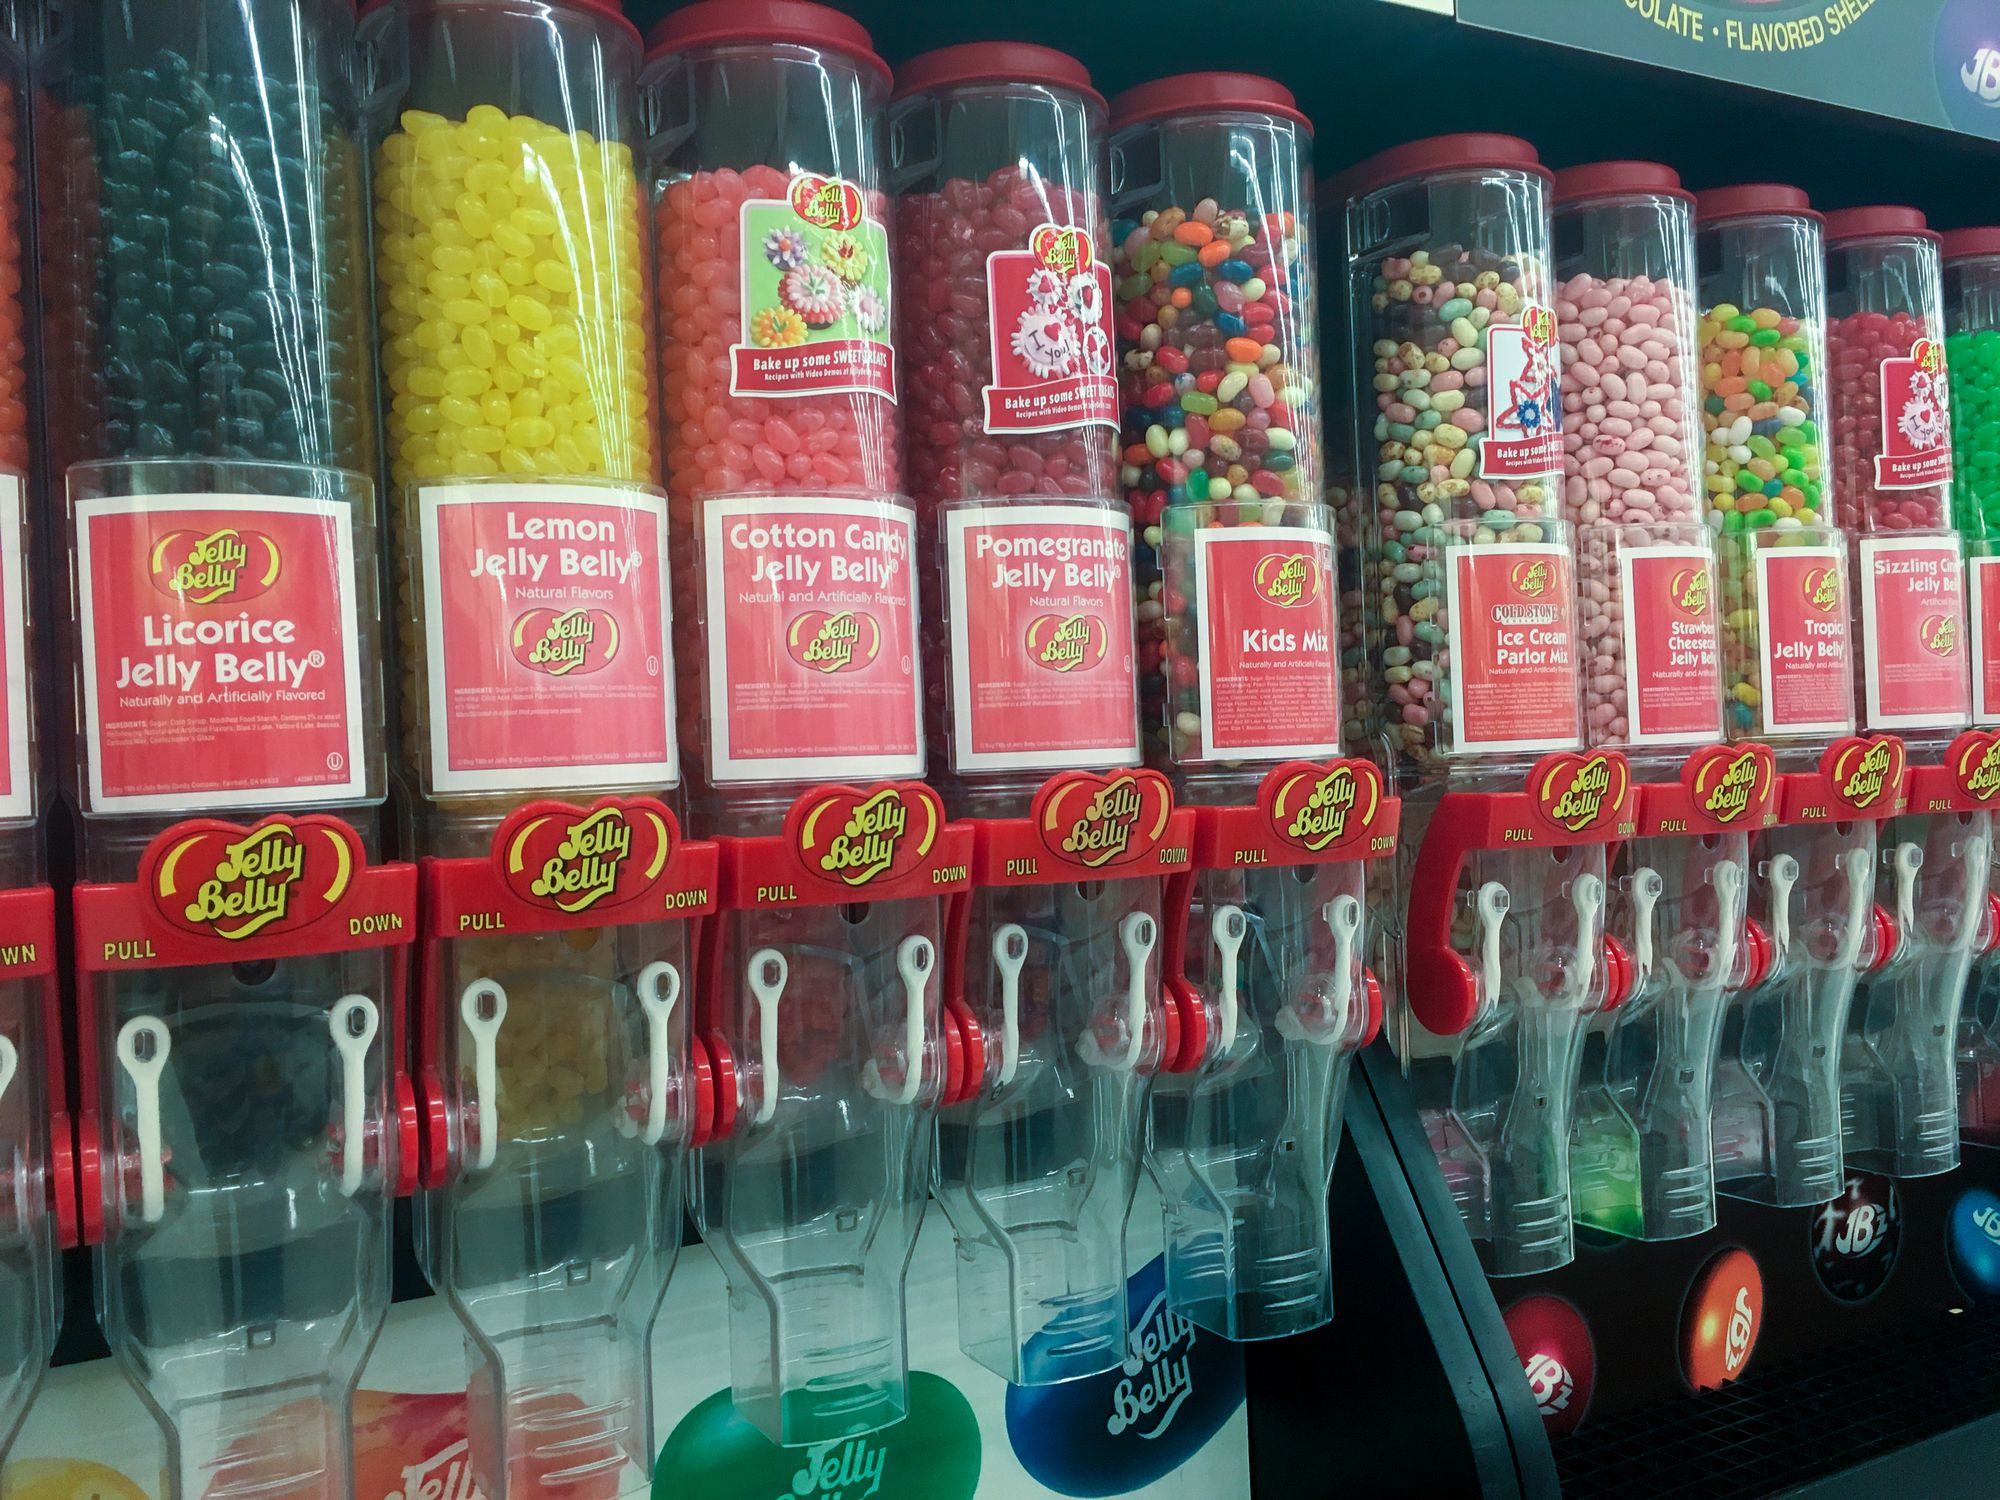 SPRINGFIELD, OR - OCTOBER 28, 2015: Bulk food section at this grocery store includes the well-known brand of jelly beans, Jelly Belly.